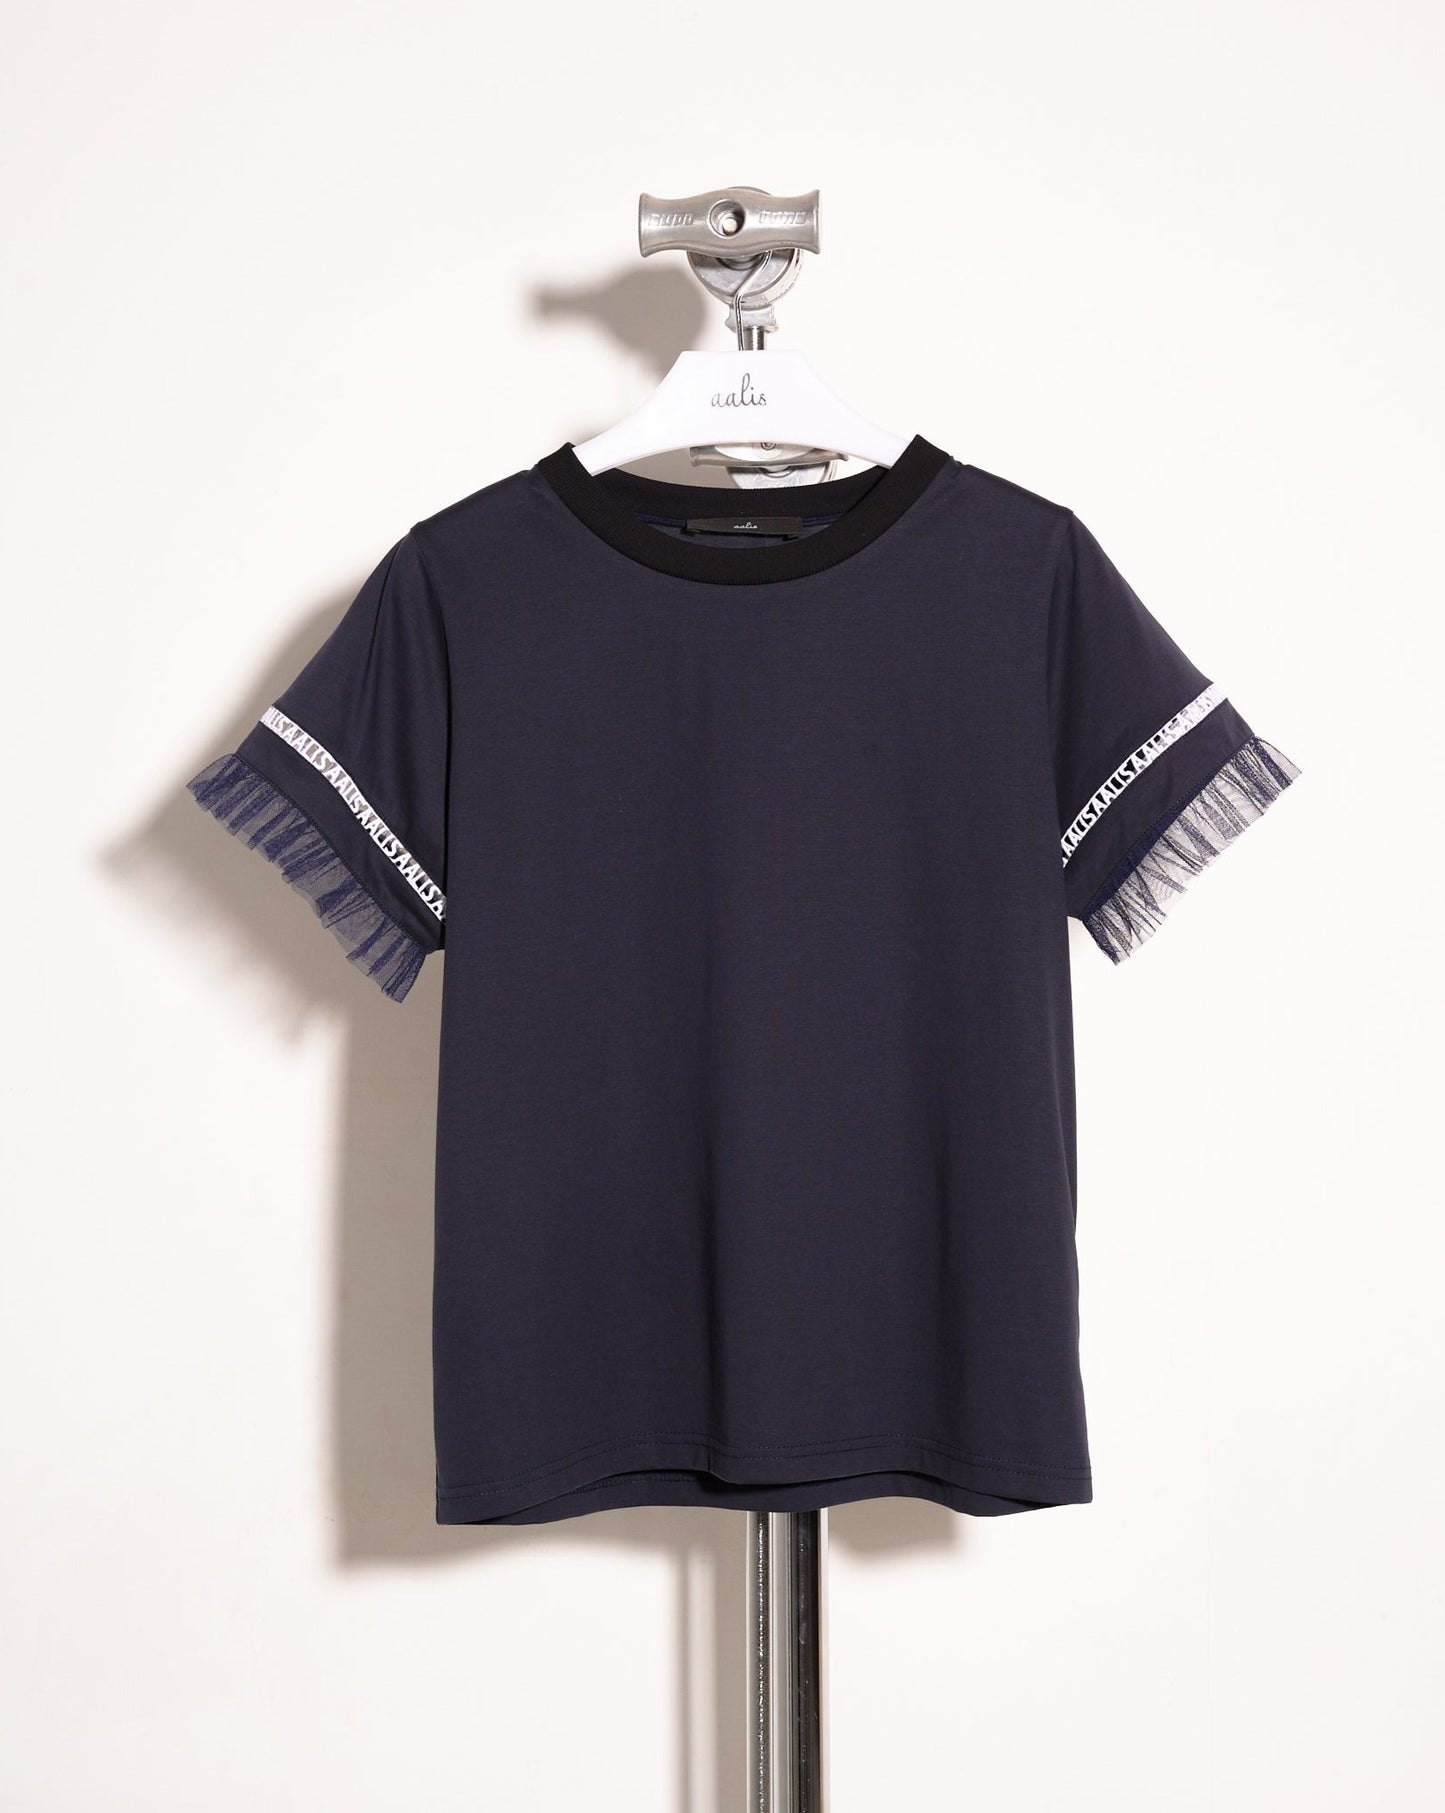 Load image into Gallery viewer, aalis OLIVIE embroidered letters top (Navy)
